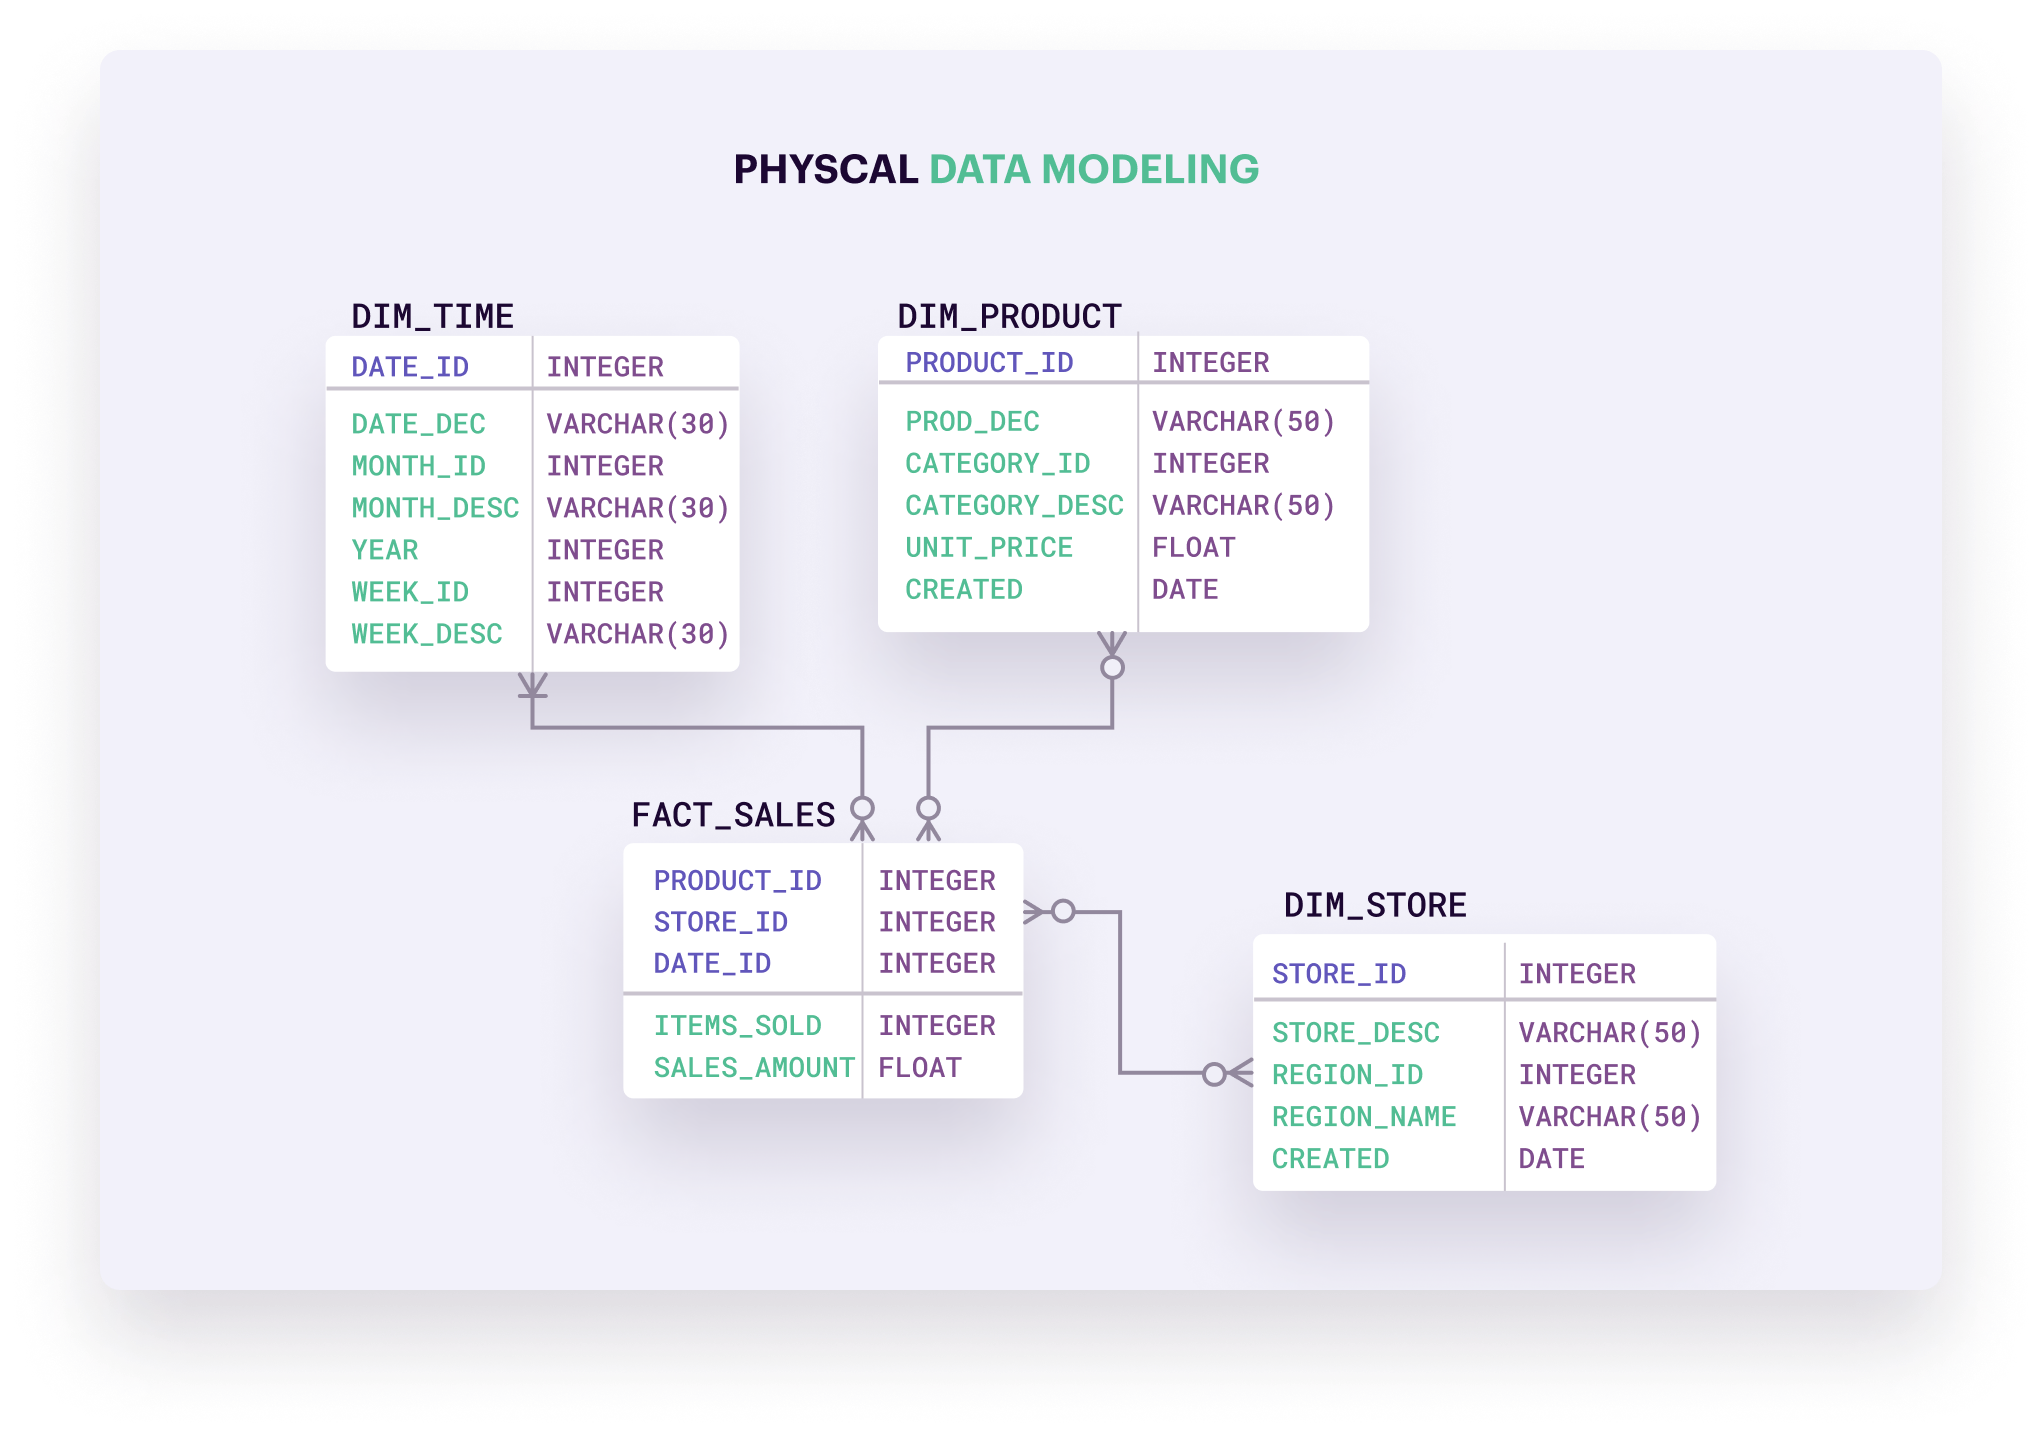 Data models for businesses and products